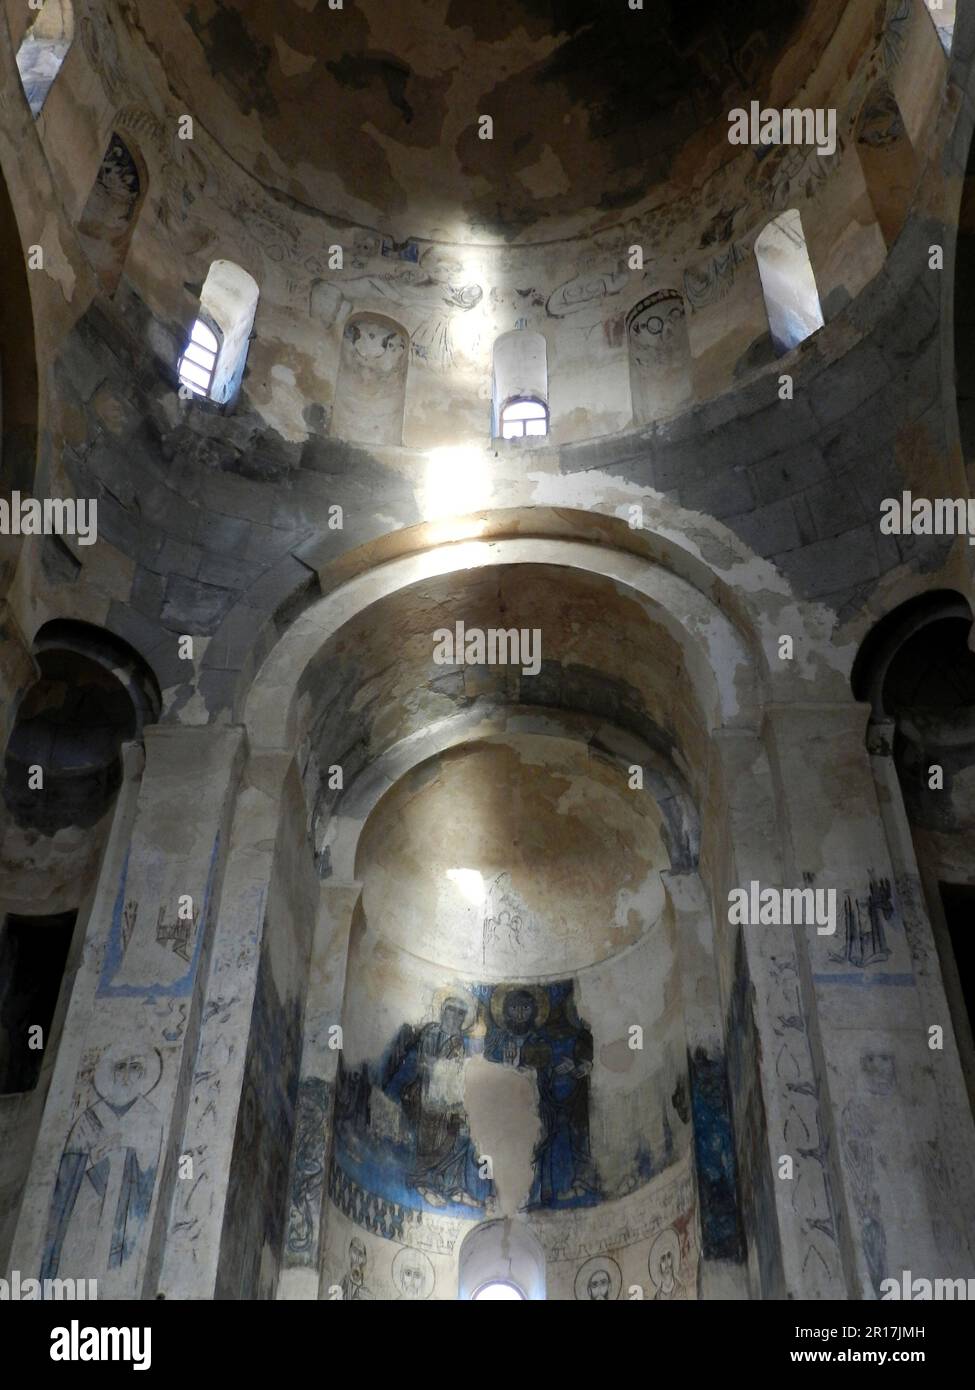 Turkey, Anatolia:  Akdamar Kilisesi (Church of the Holy Cross), one of the gems of Armenian architecture, dating from 921 AD, stands abandoned on an i Stock Photo